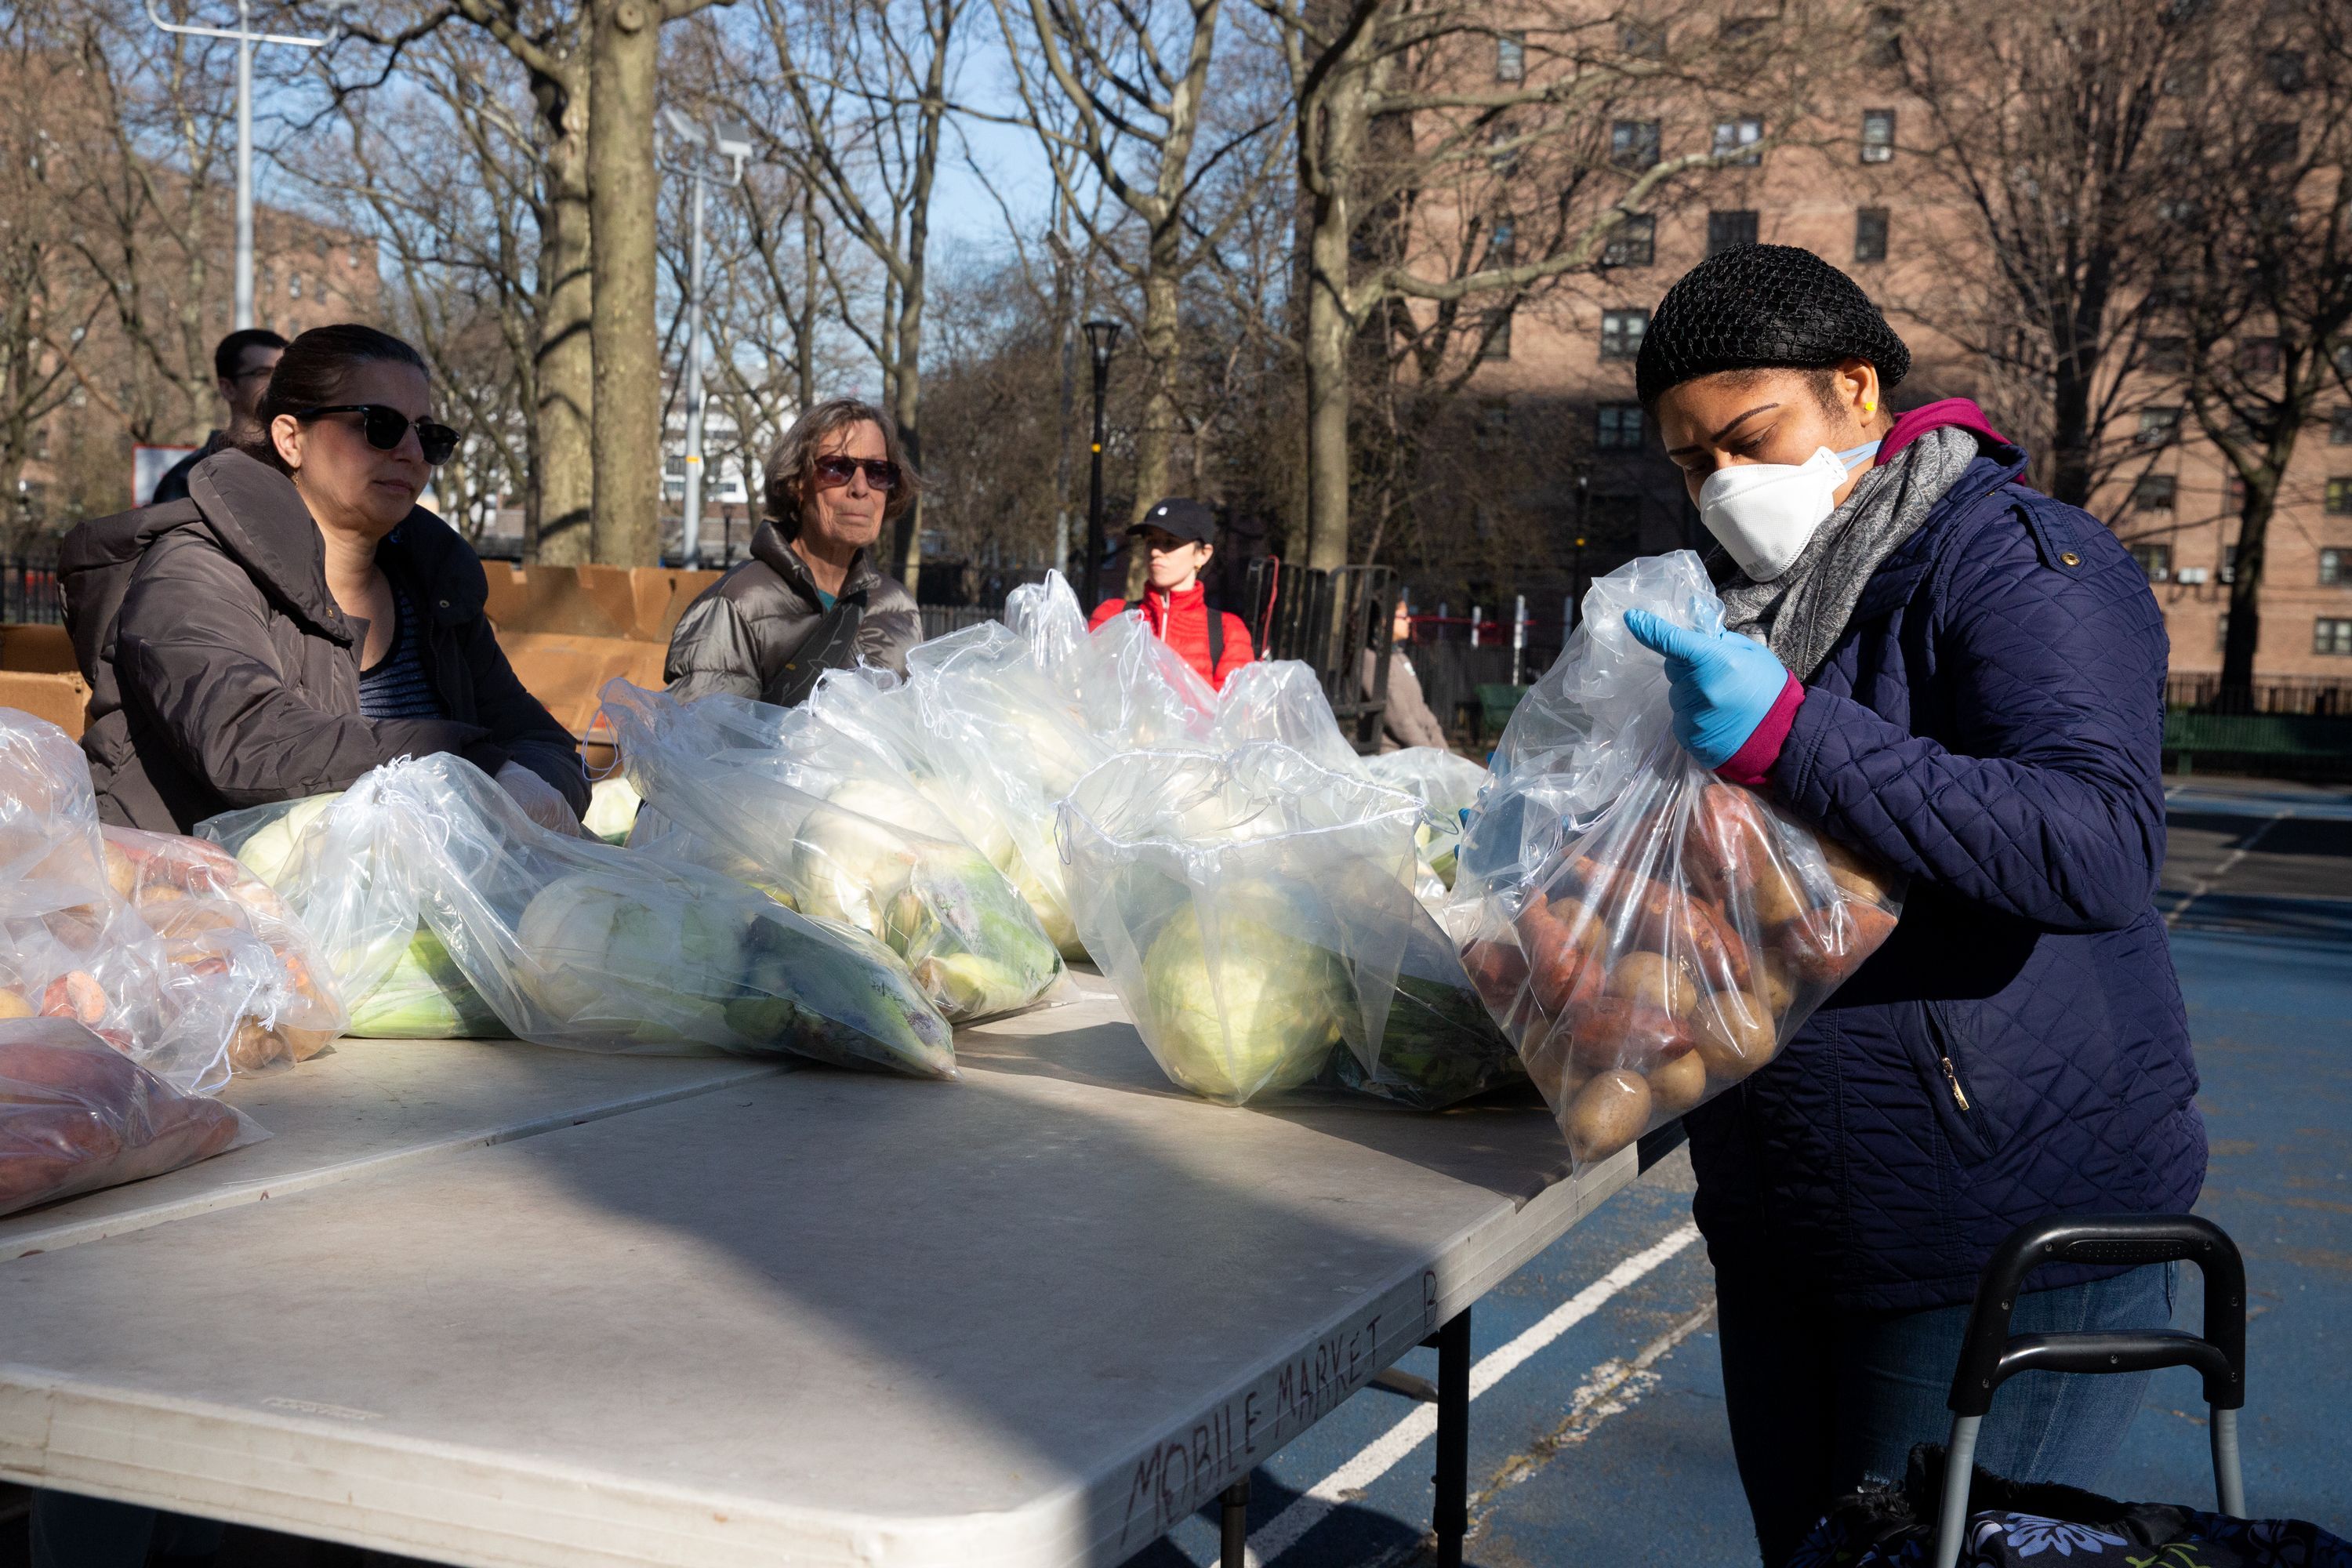 The nonprofit City Harvest set up a food bank at the Tompkins Houses in Bed-Stuy, Brooklyn.